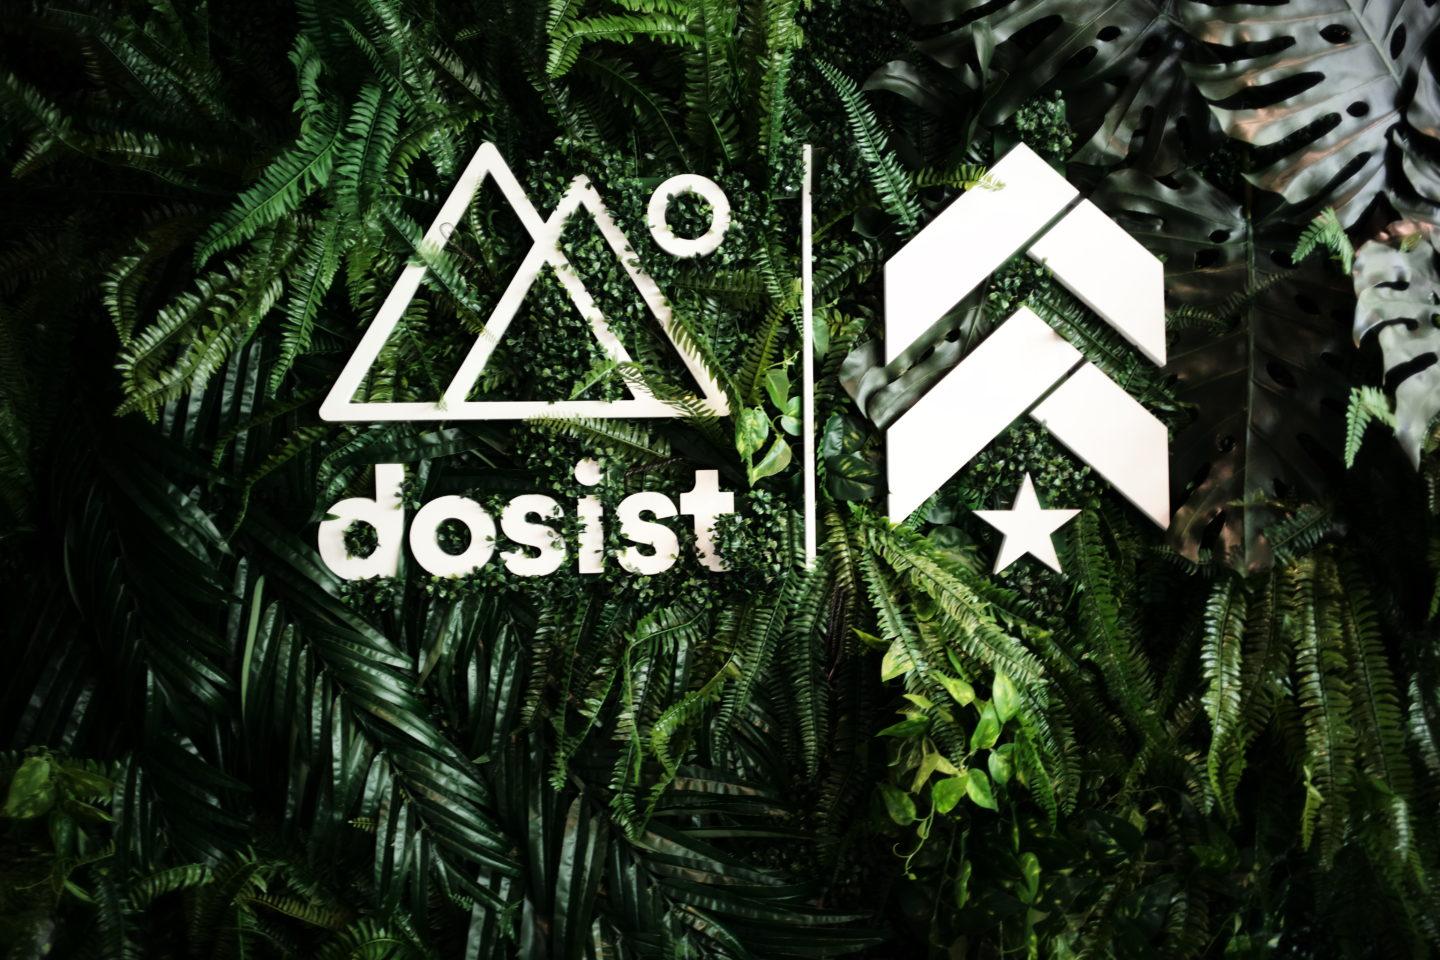 Dosist double triangle and Barry's Bootcamp upward arrows and star logos on wall of greenery